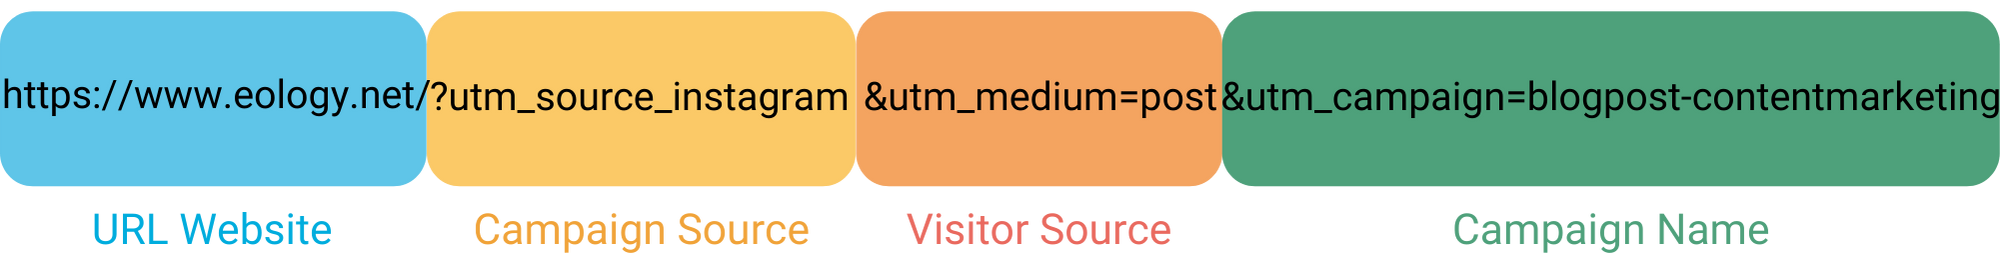 The graphic shows the structure of a link with UTM parameters. At the beginning of the link is the website URL. In this case: https://www.eology.de/. This is followed by the campaign source with ?utm_source_instagram. Then the visitor source is named with &utm_medium=post. Finally, comes the campaign name. In this case &utm_campaign=blogpost-contentmarketing